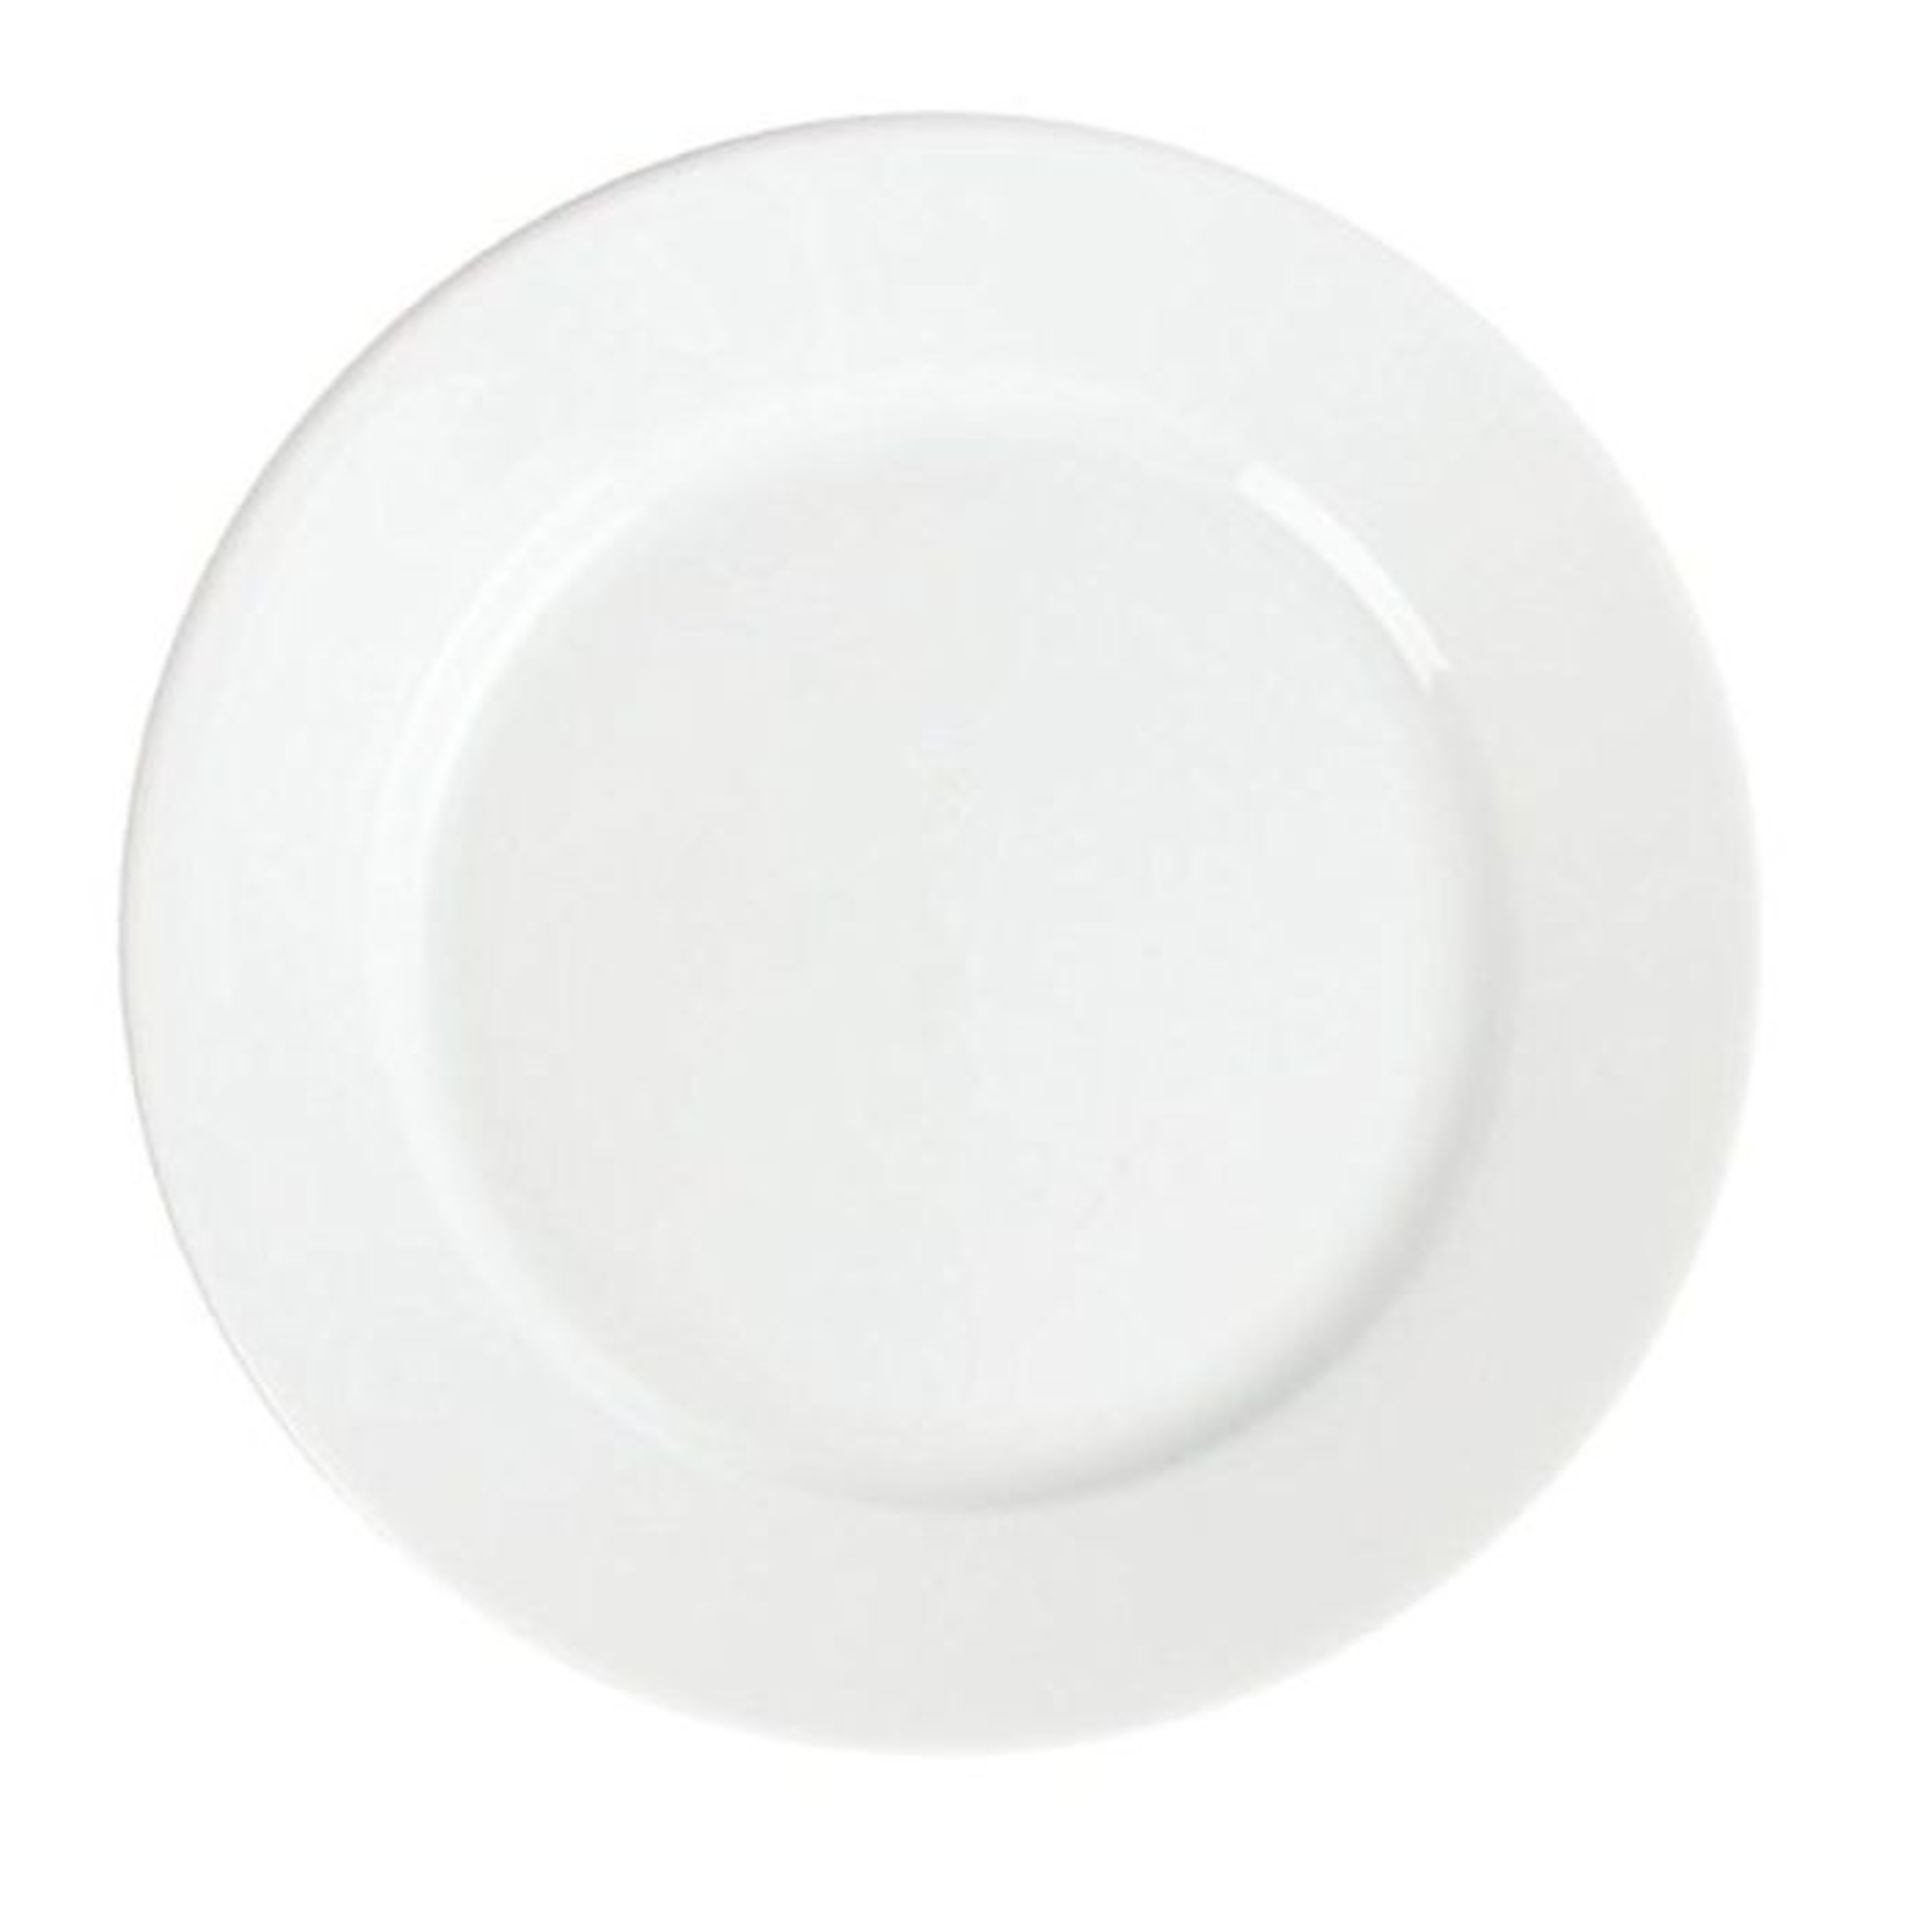 Olympia White Ware Wide Rimmed Service Plates 202mm Porcelain Restaurant 12pc